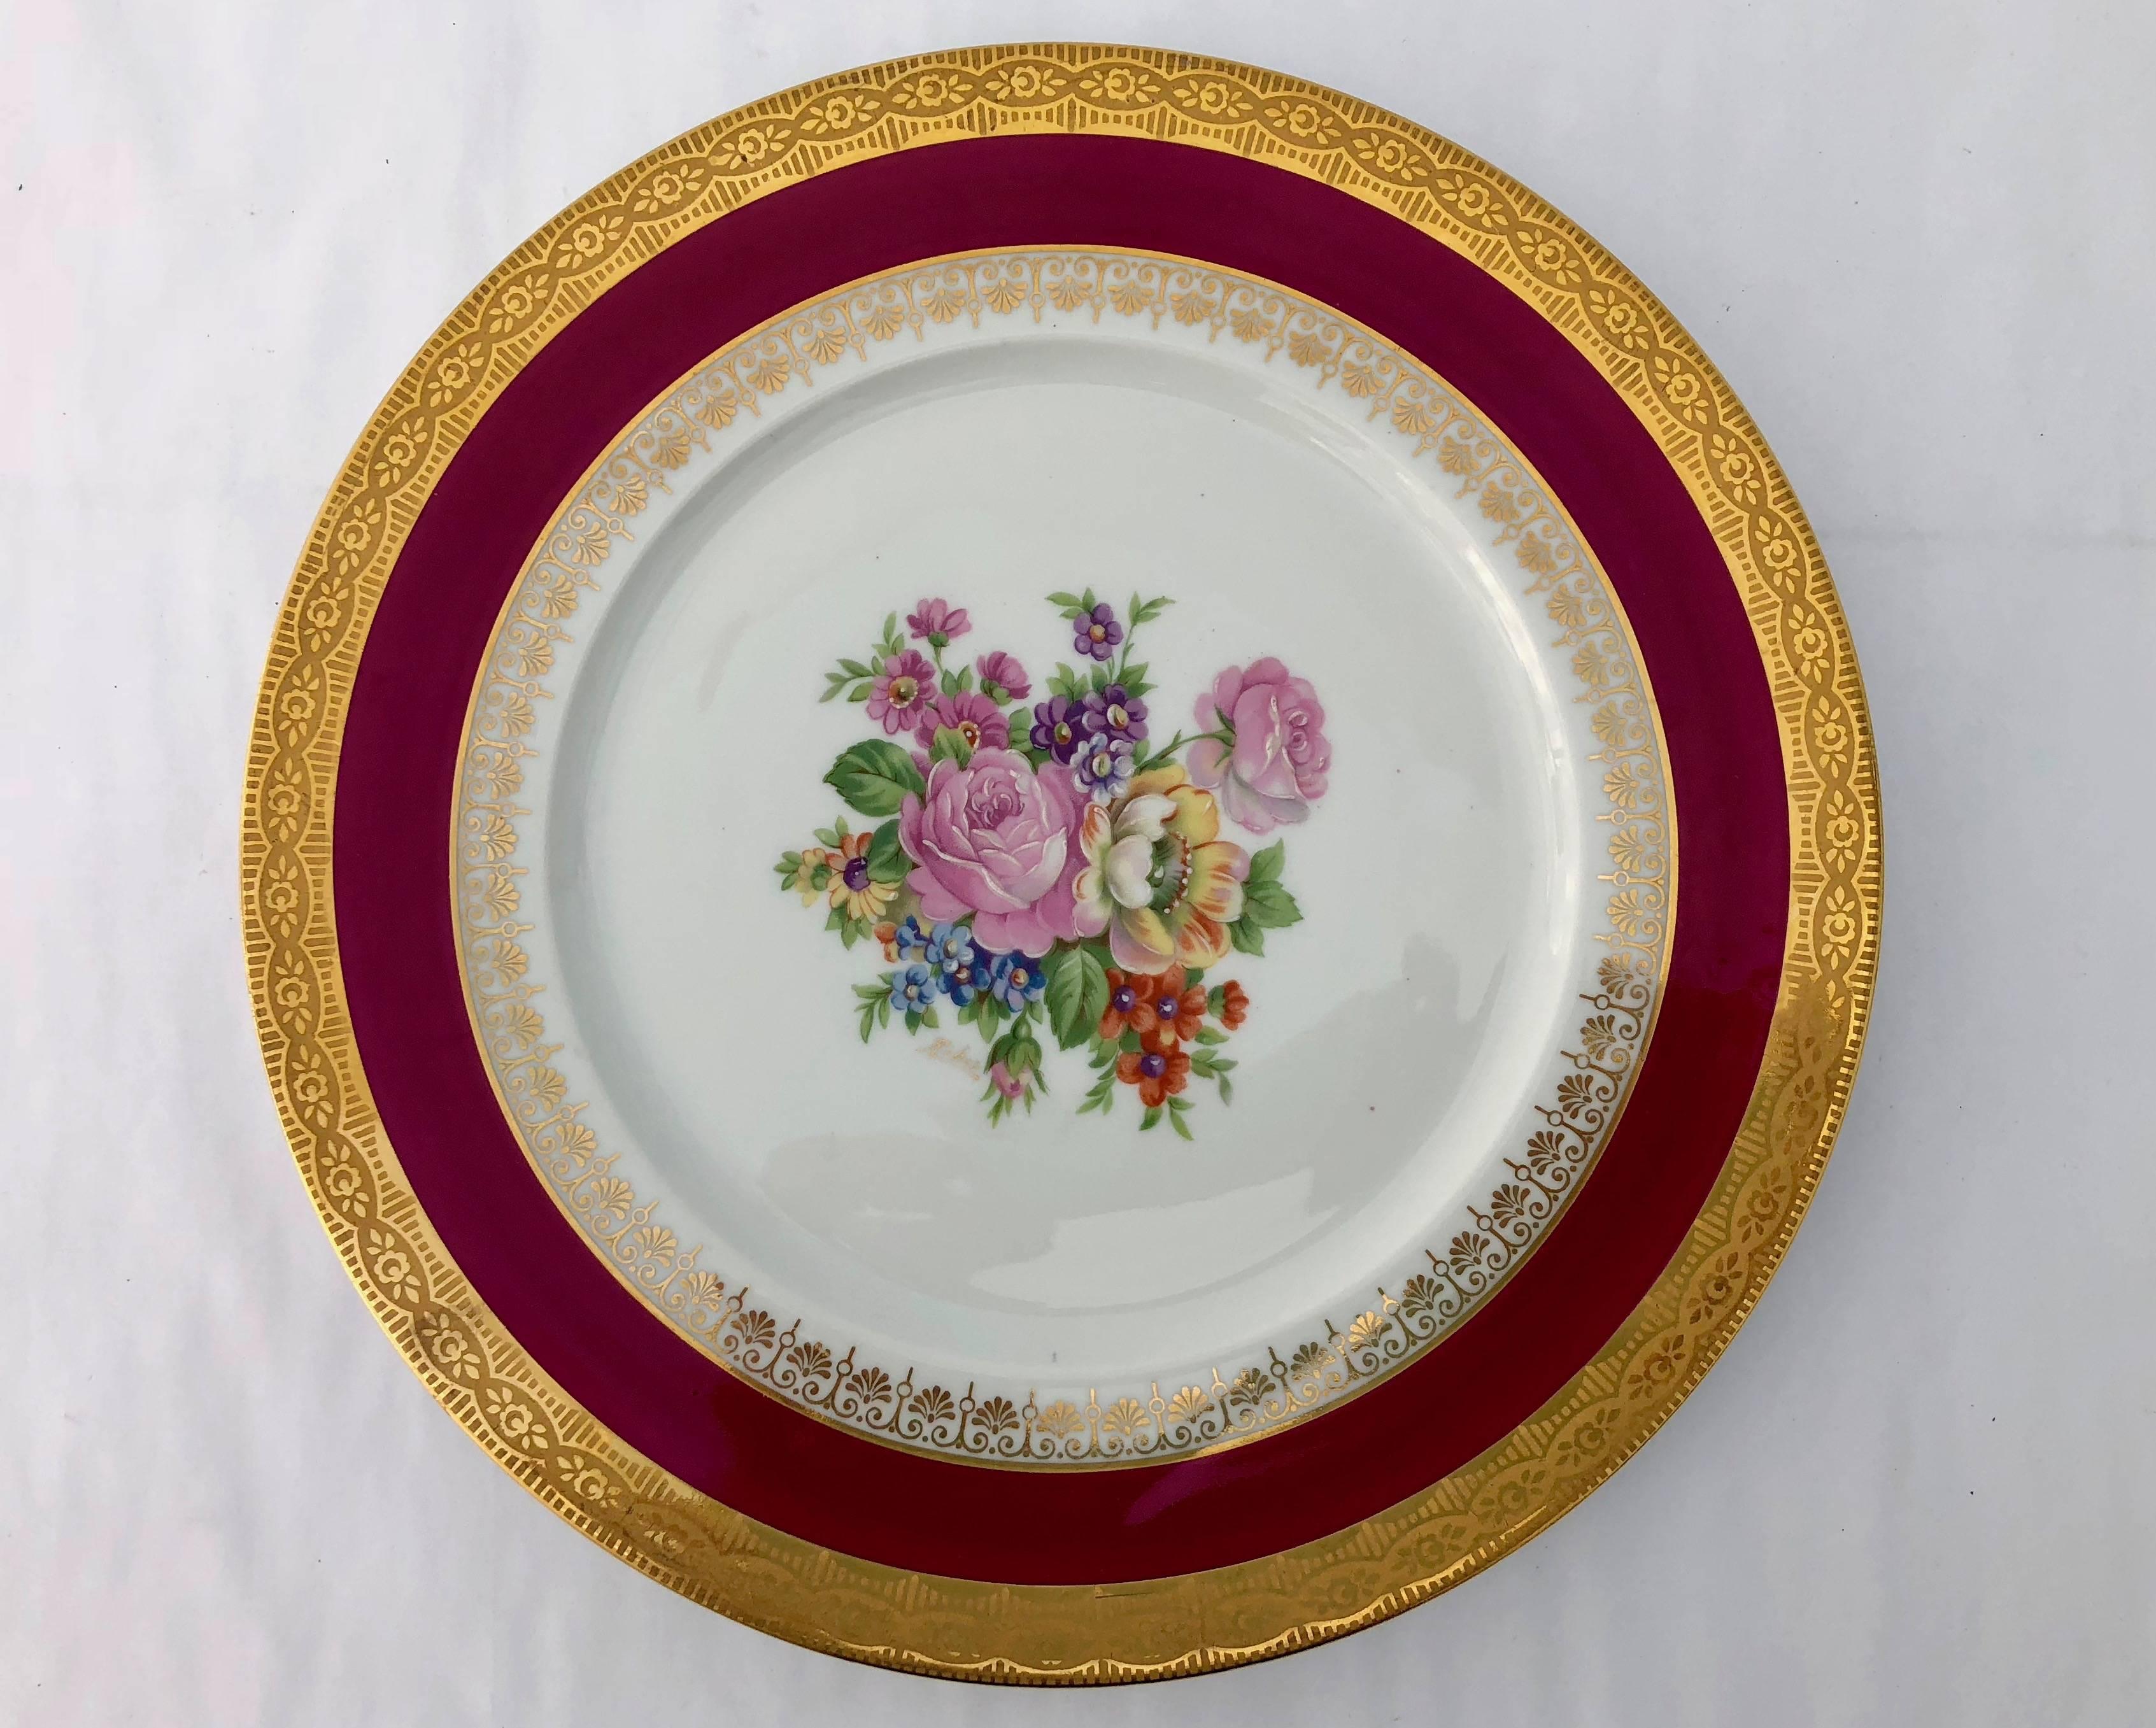 These are two stunning French Limoges ceramic plates with beautiful hand-painted flowers and red and gold trim.
One was made by Unique Limoges, the other by Ribes Limoges

Sizes:
Largest: 11 x 0.9
Smallest: 9.75 x 0.7.